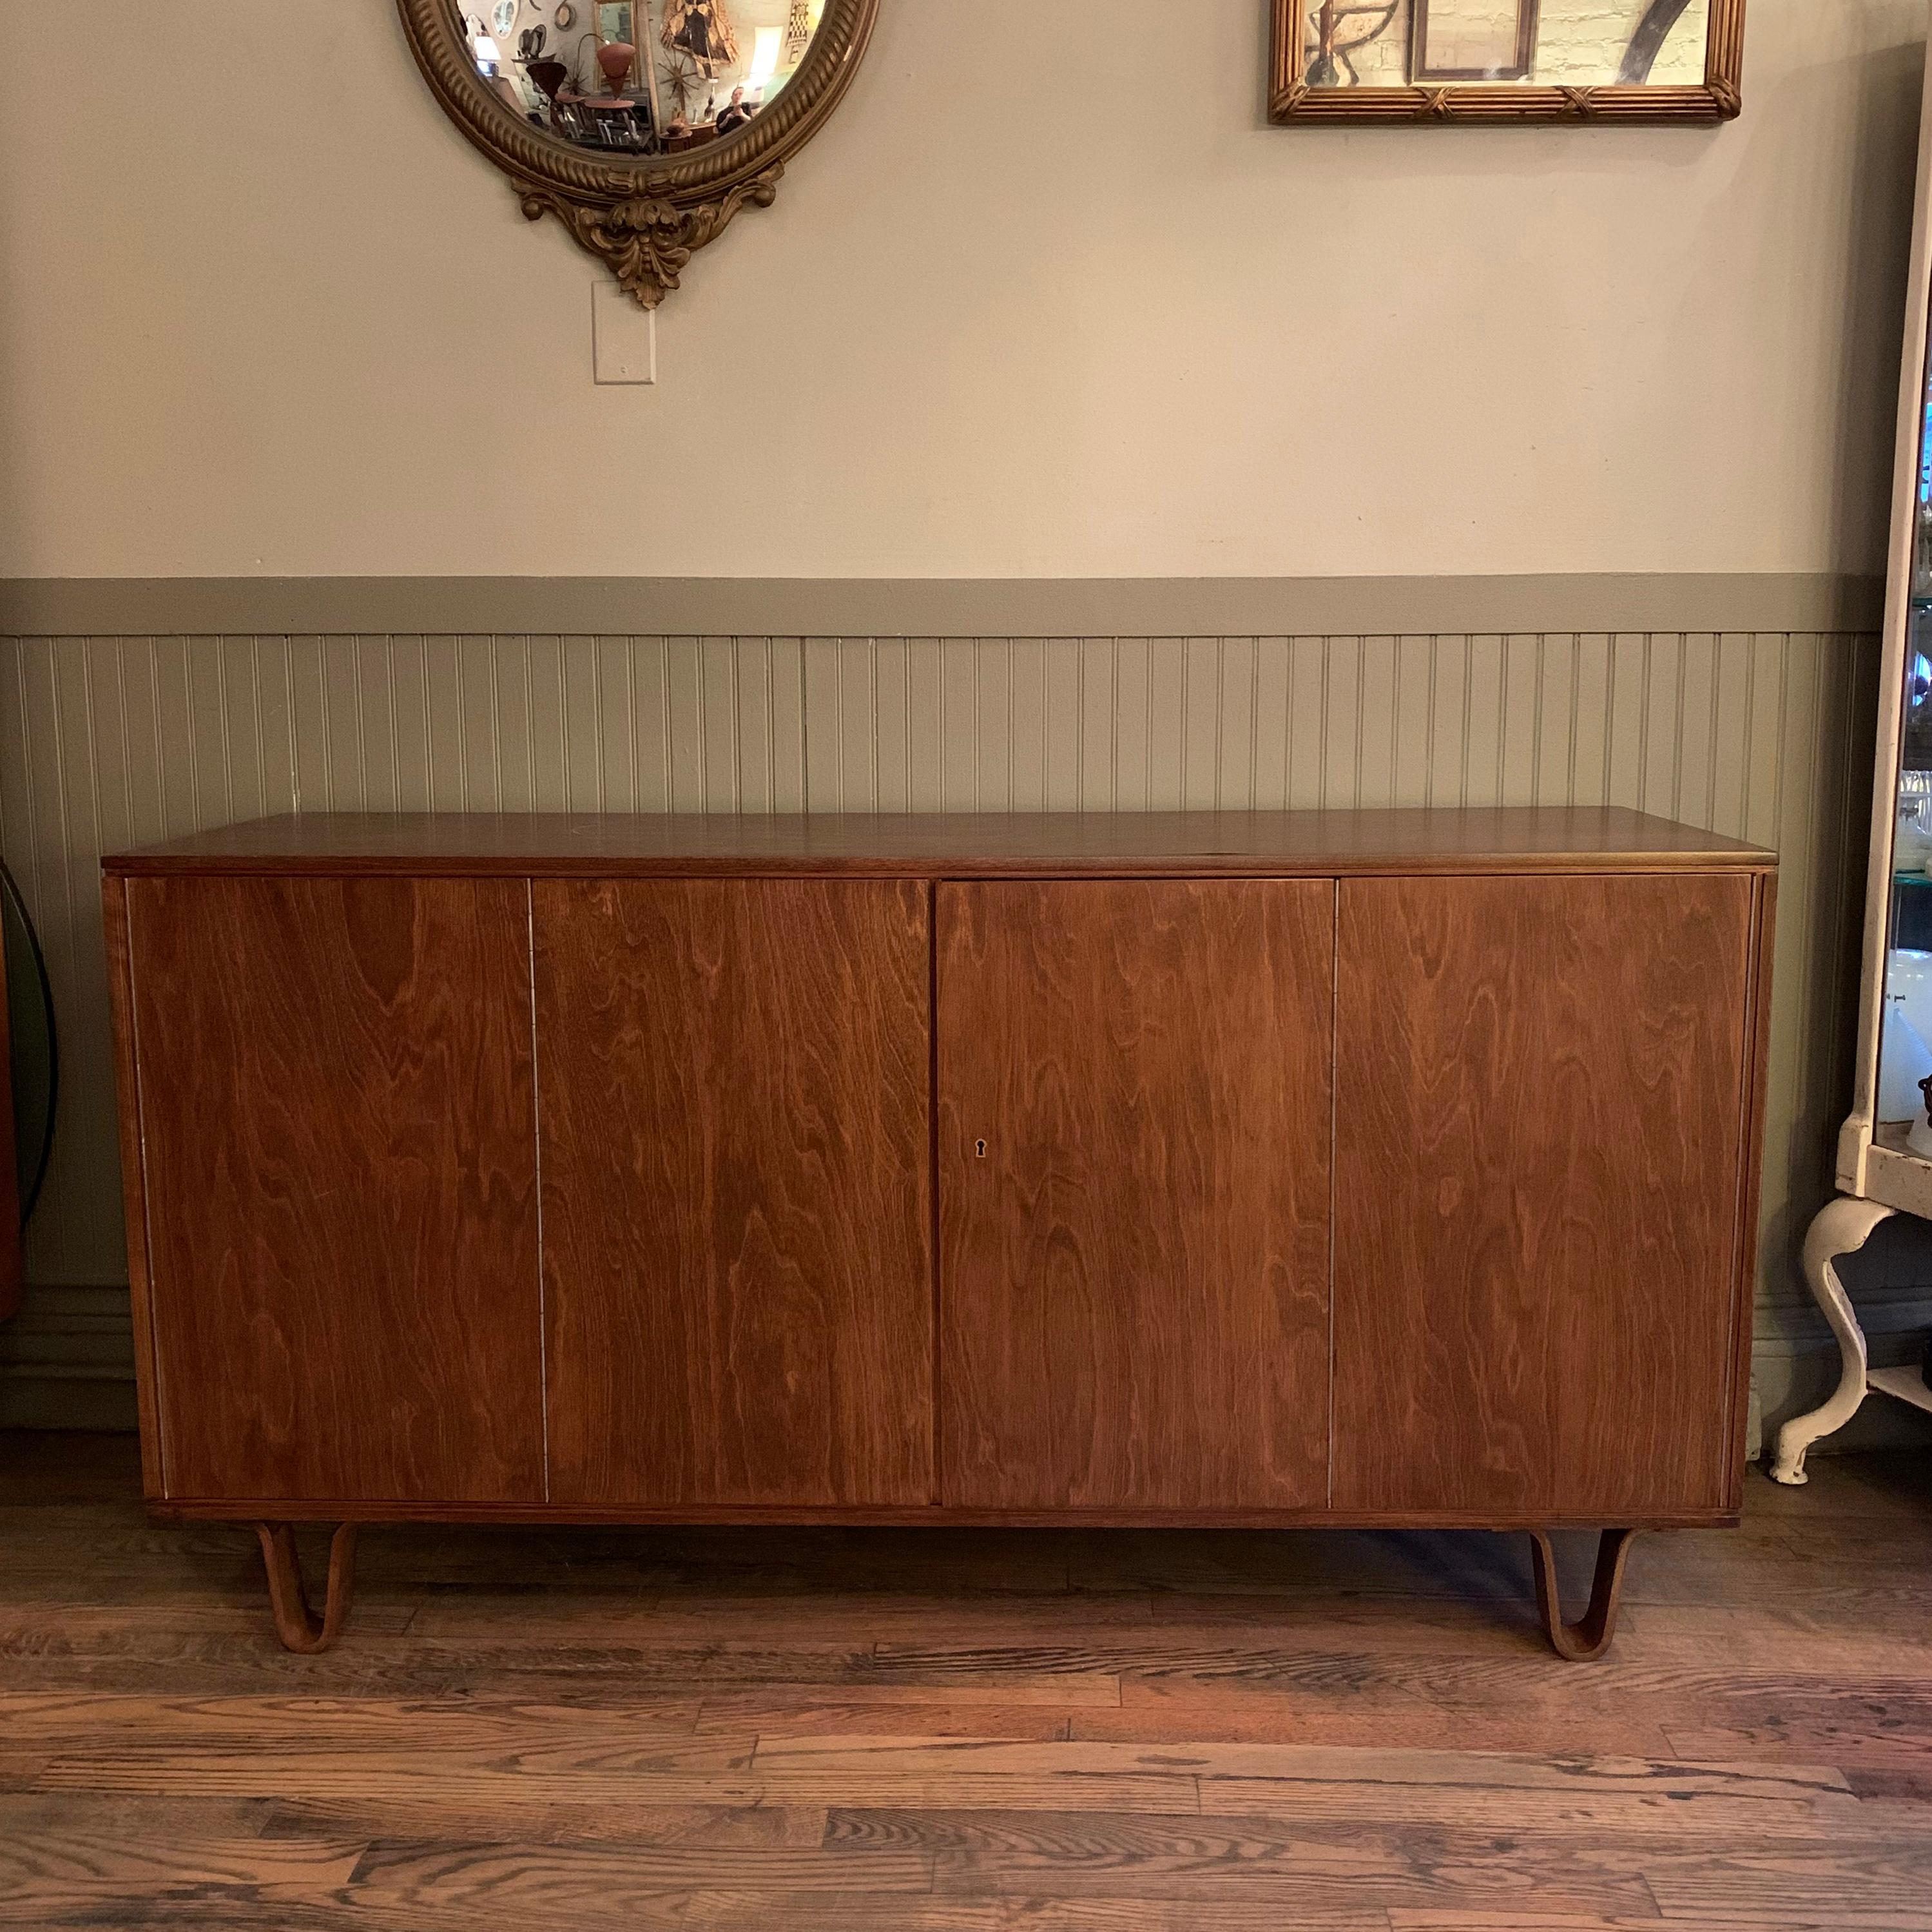 Mid-Century Modern, birch, sideboard / credenza by Cees Braakman for Pastoe, Combex series DB02 features a streamlined exterior with hinged doors and bentwood legs. The interior provides ample interior storage with shelves and pullout / pull-out